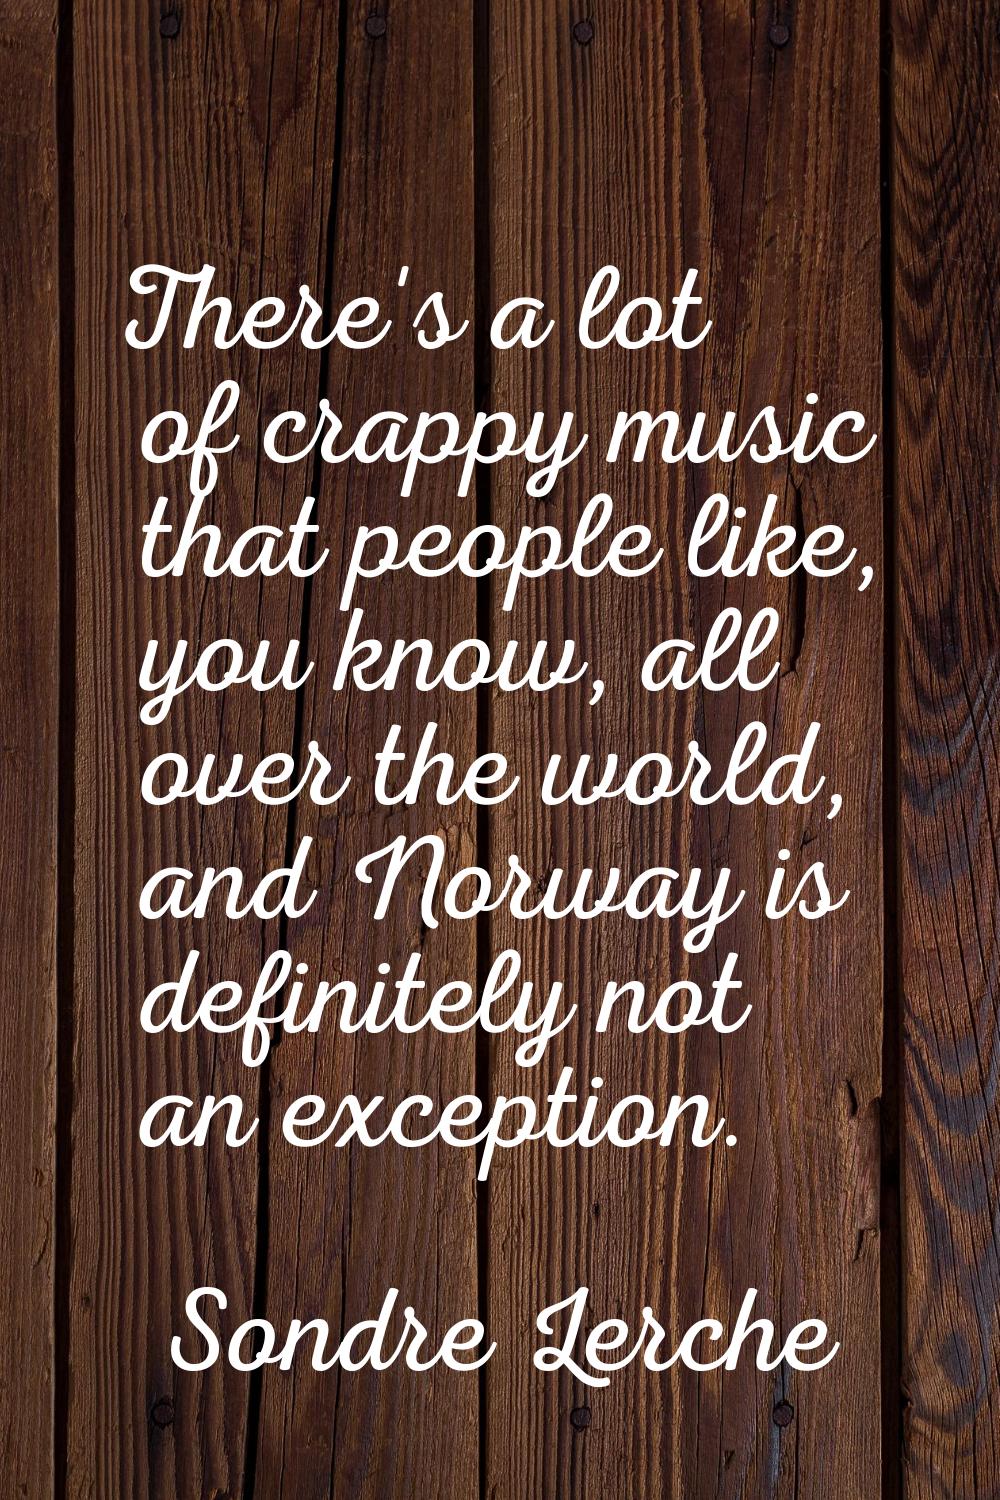 There's a lot of crappy music that people like, you know, all over the world, and Norway is definit